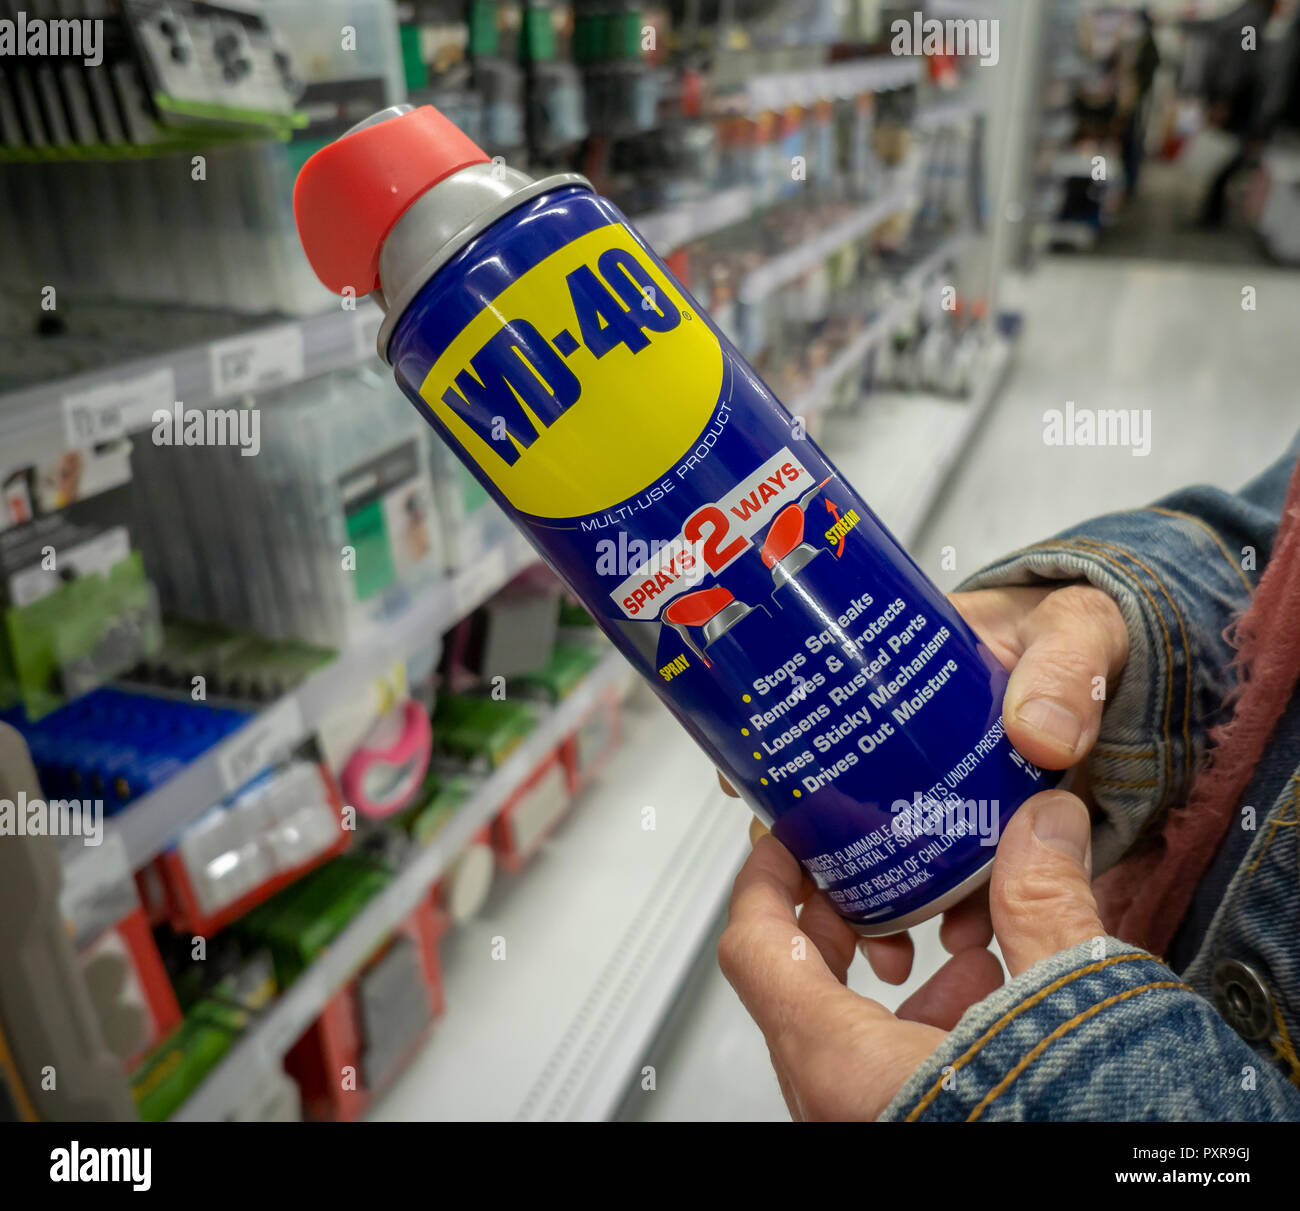 A shopper buys a can of WD-40 spray lubricant in a store in New York on Monday, October 15, 2018. The WD-40 Company is expected to report earnings on October 18 after the close of the market. (Â© Richard B. Levine) Stock Photo